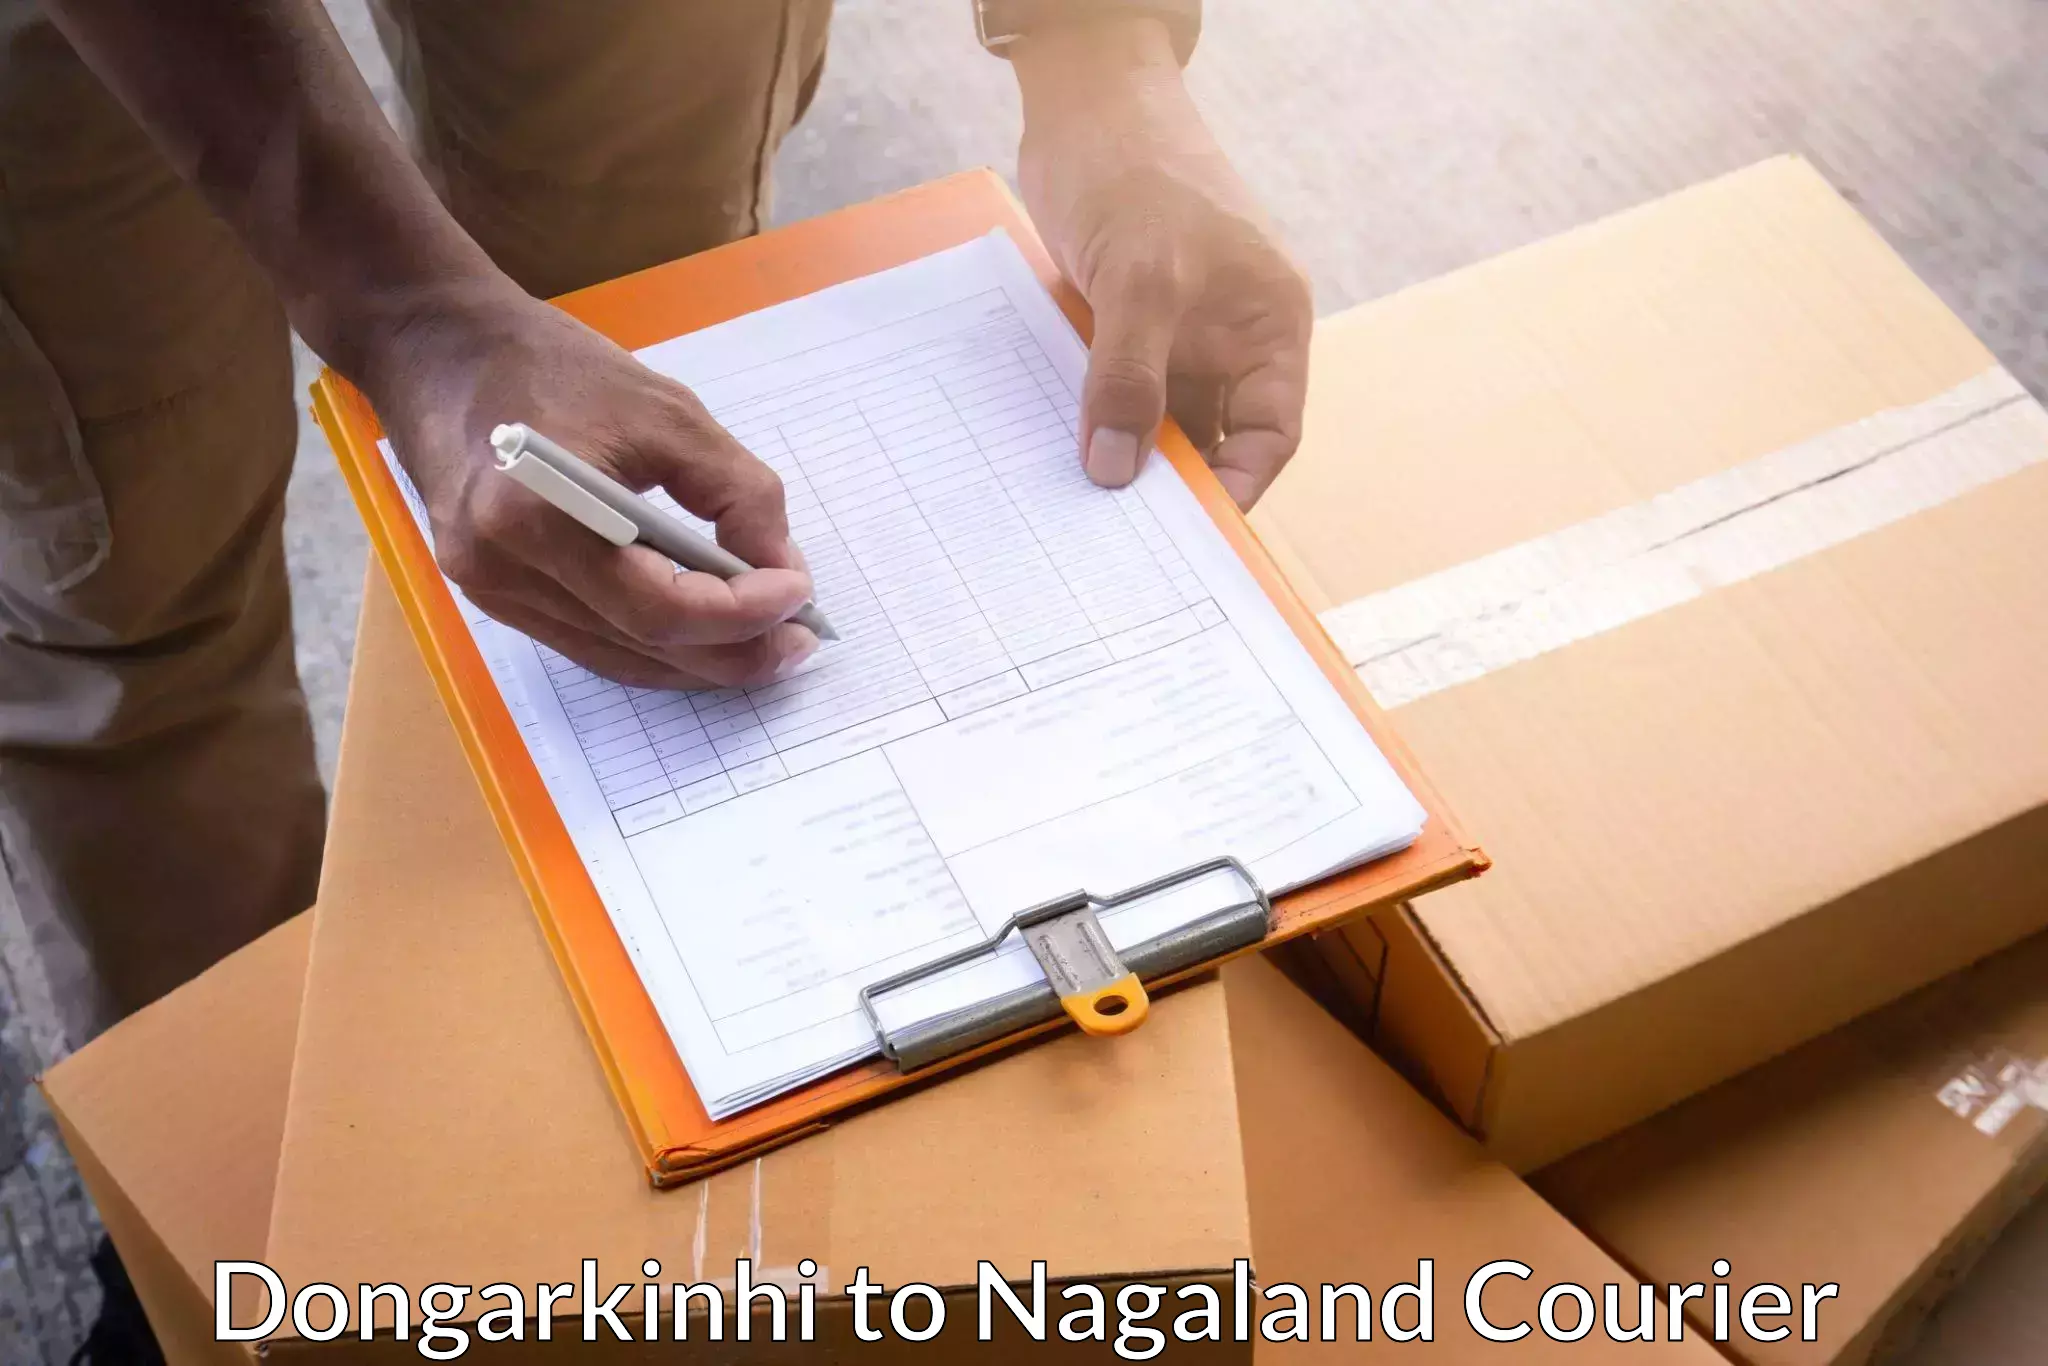 Air courier services Dongarkinhi to Nagaland